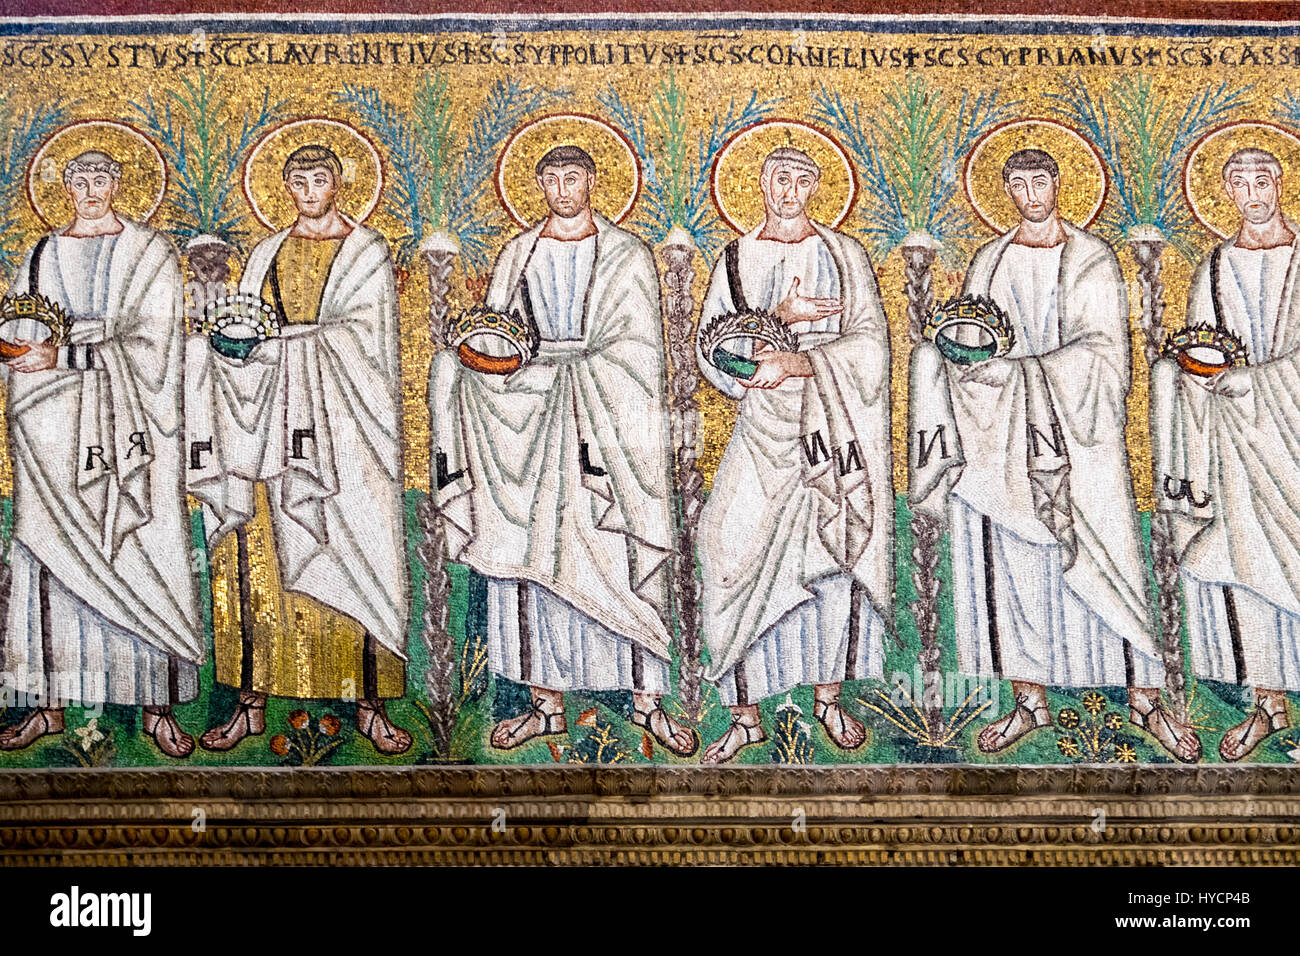 Line of male saints in the church, Sant Apollinare Nuovo in Ravenna, Italy Stock Photo